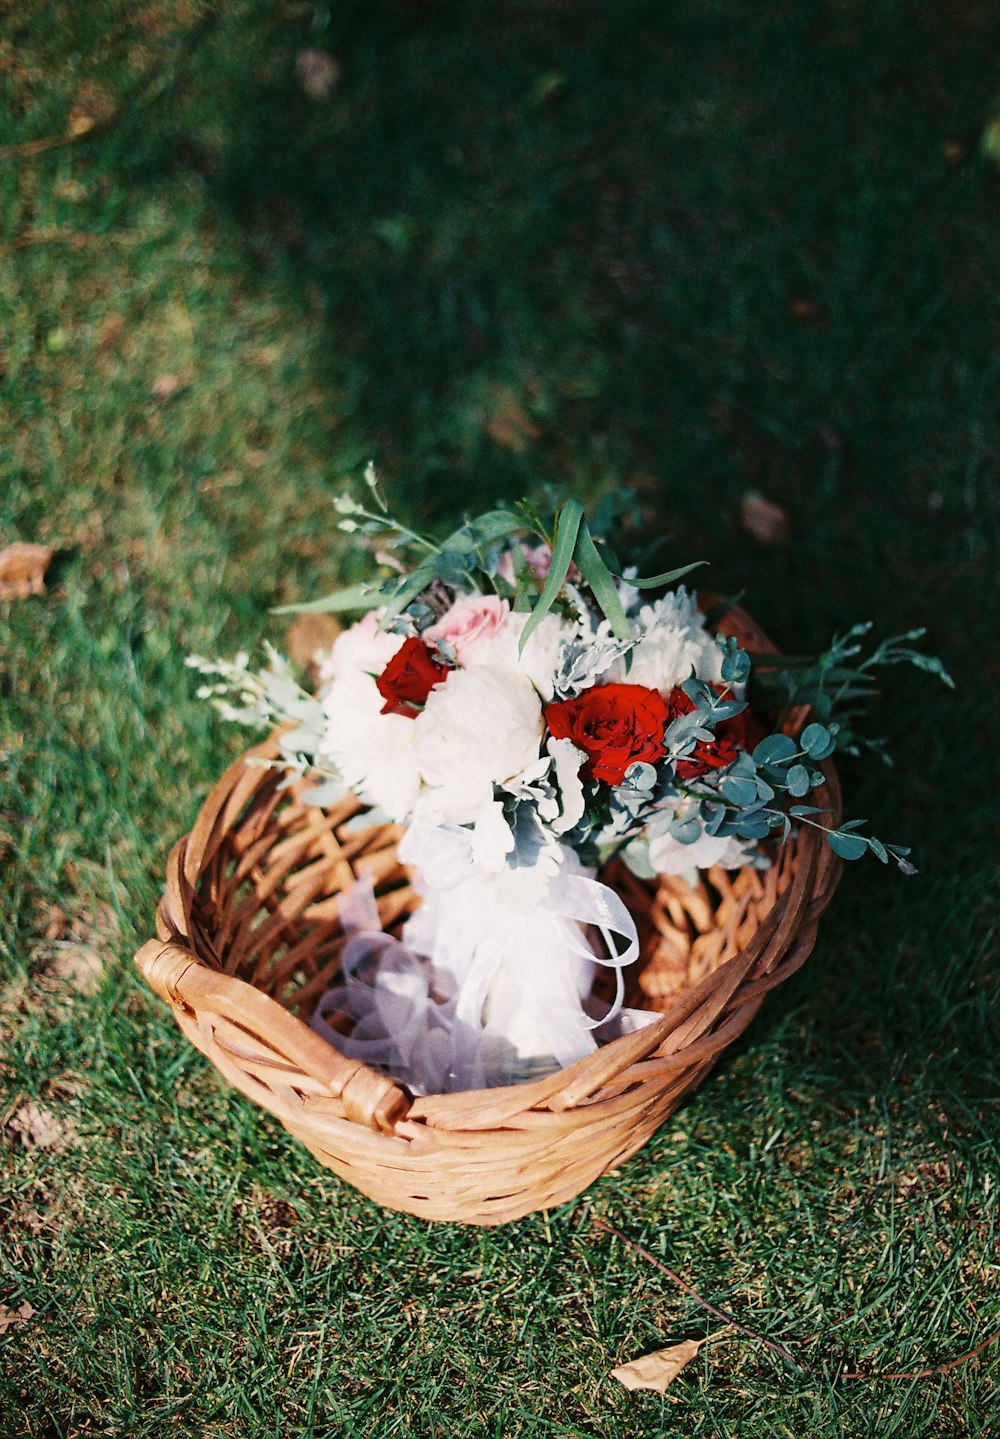 white and red flower bouquet in basket